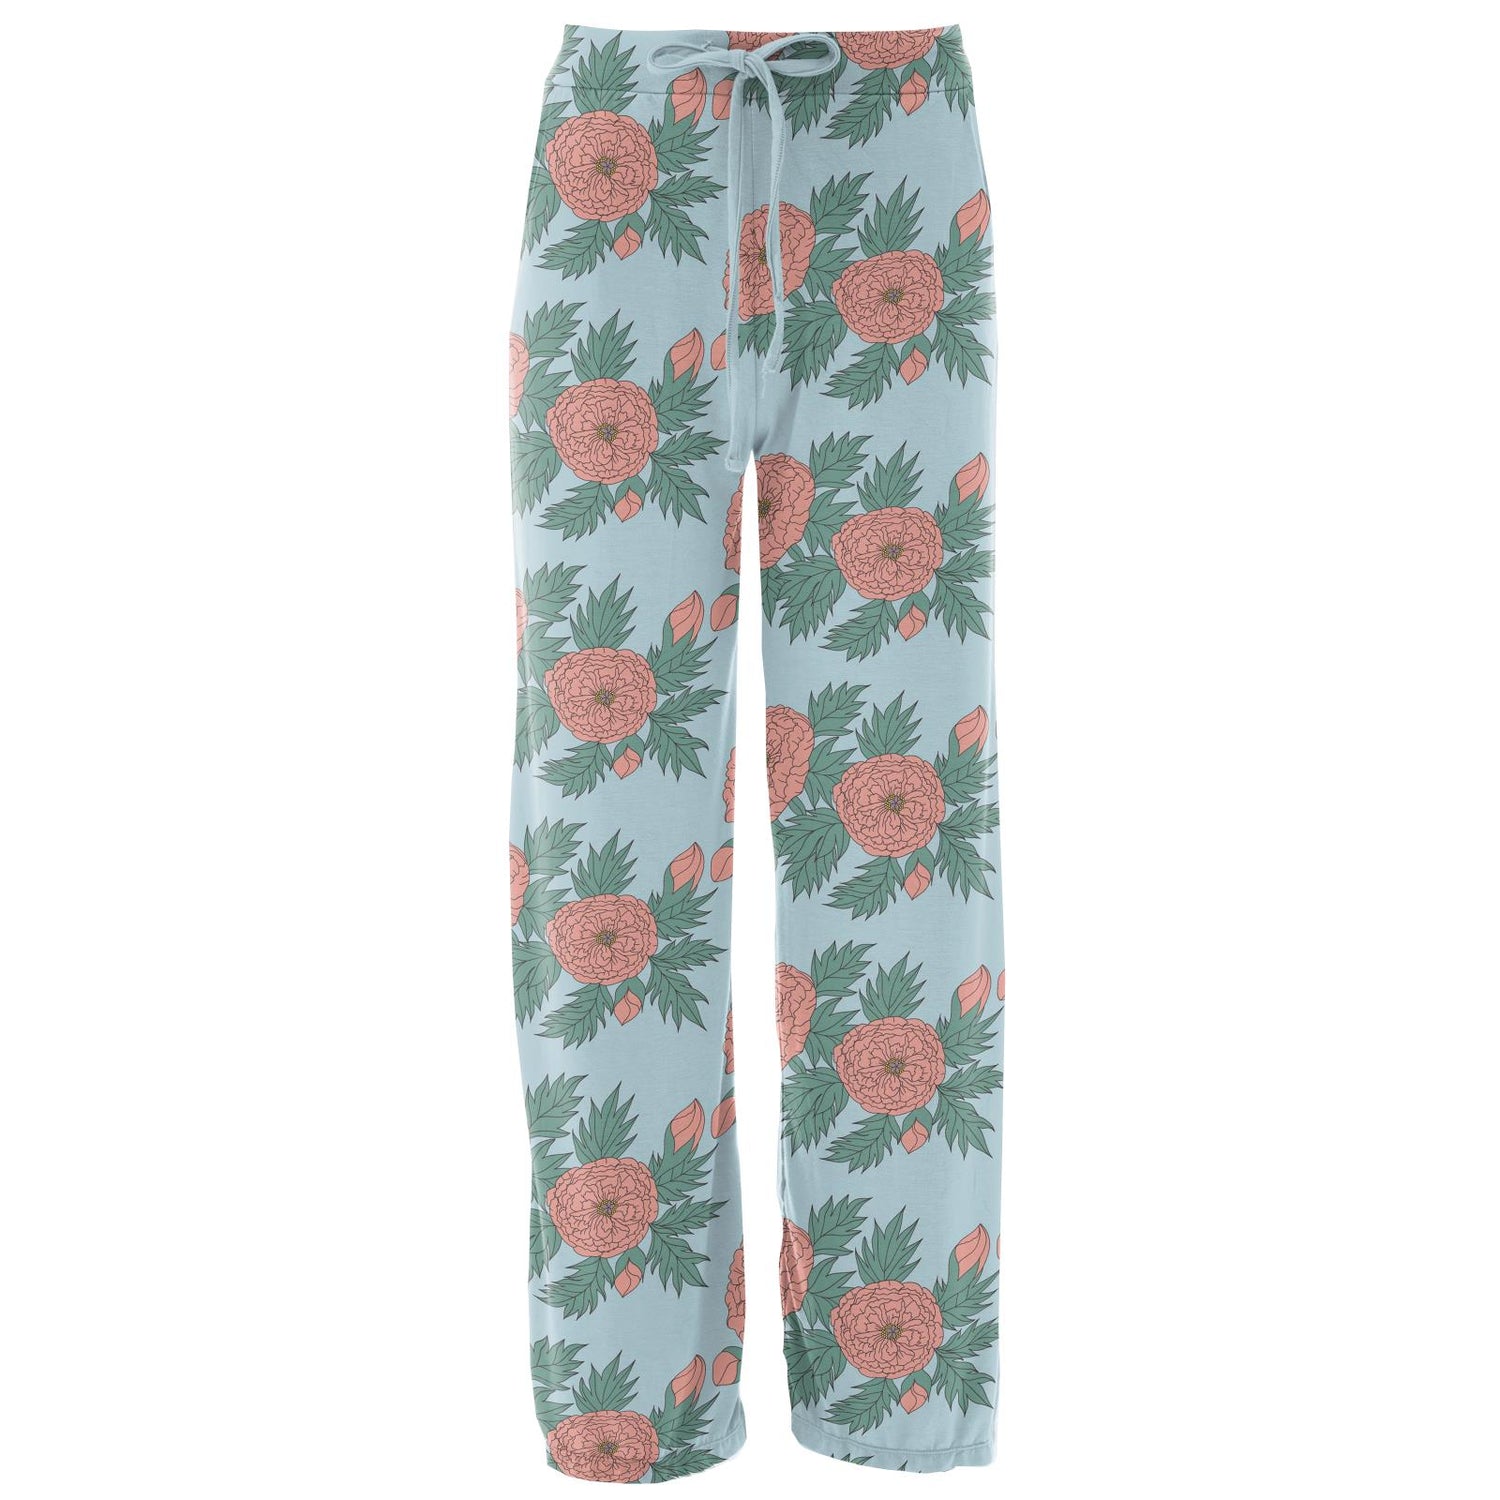 Women's Print Lounge Pants in Spring Sky Floral